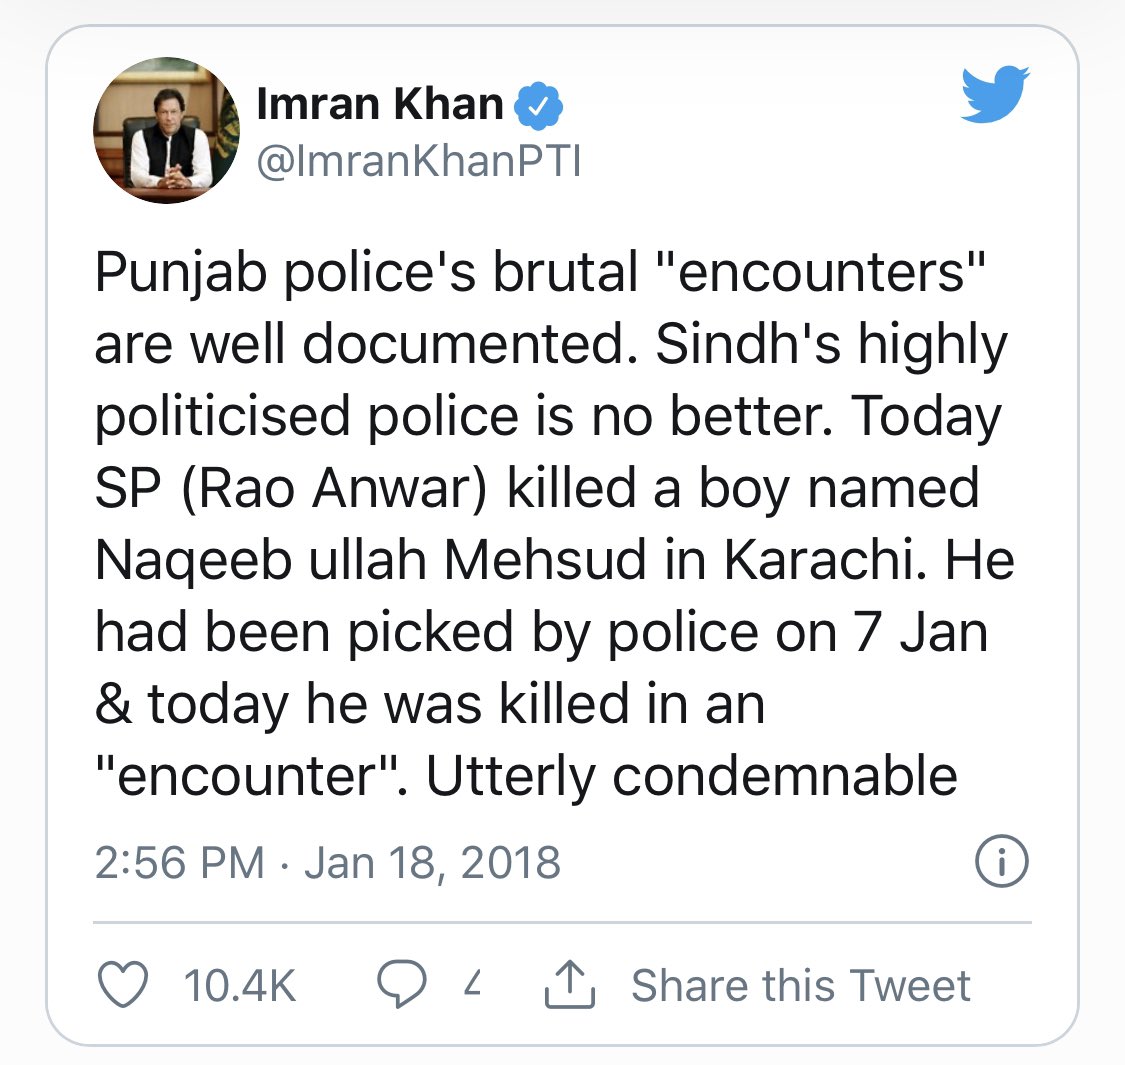 In Jan18, a notorious Sindh police officer Rao Anwar close to Asif Zardari arrested a young model Naqeebullah Mehsud in Karachi & killed him.Victim had a big online presence with tons of HD images which were exploited.All Pakistanis was hurt & offended at this injustice./82